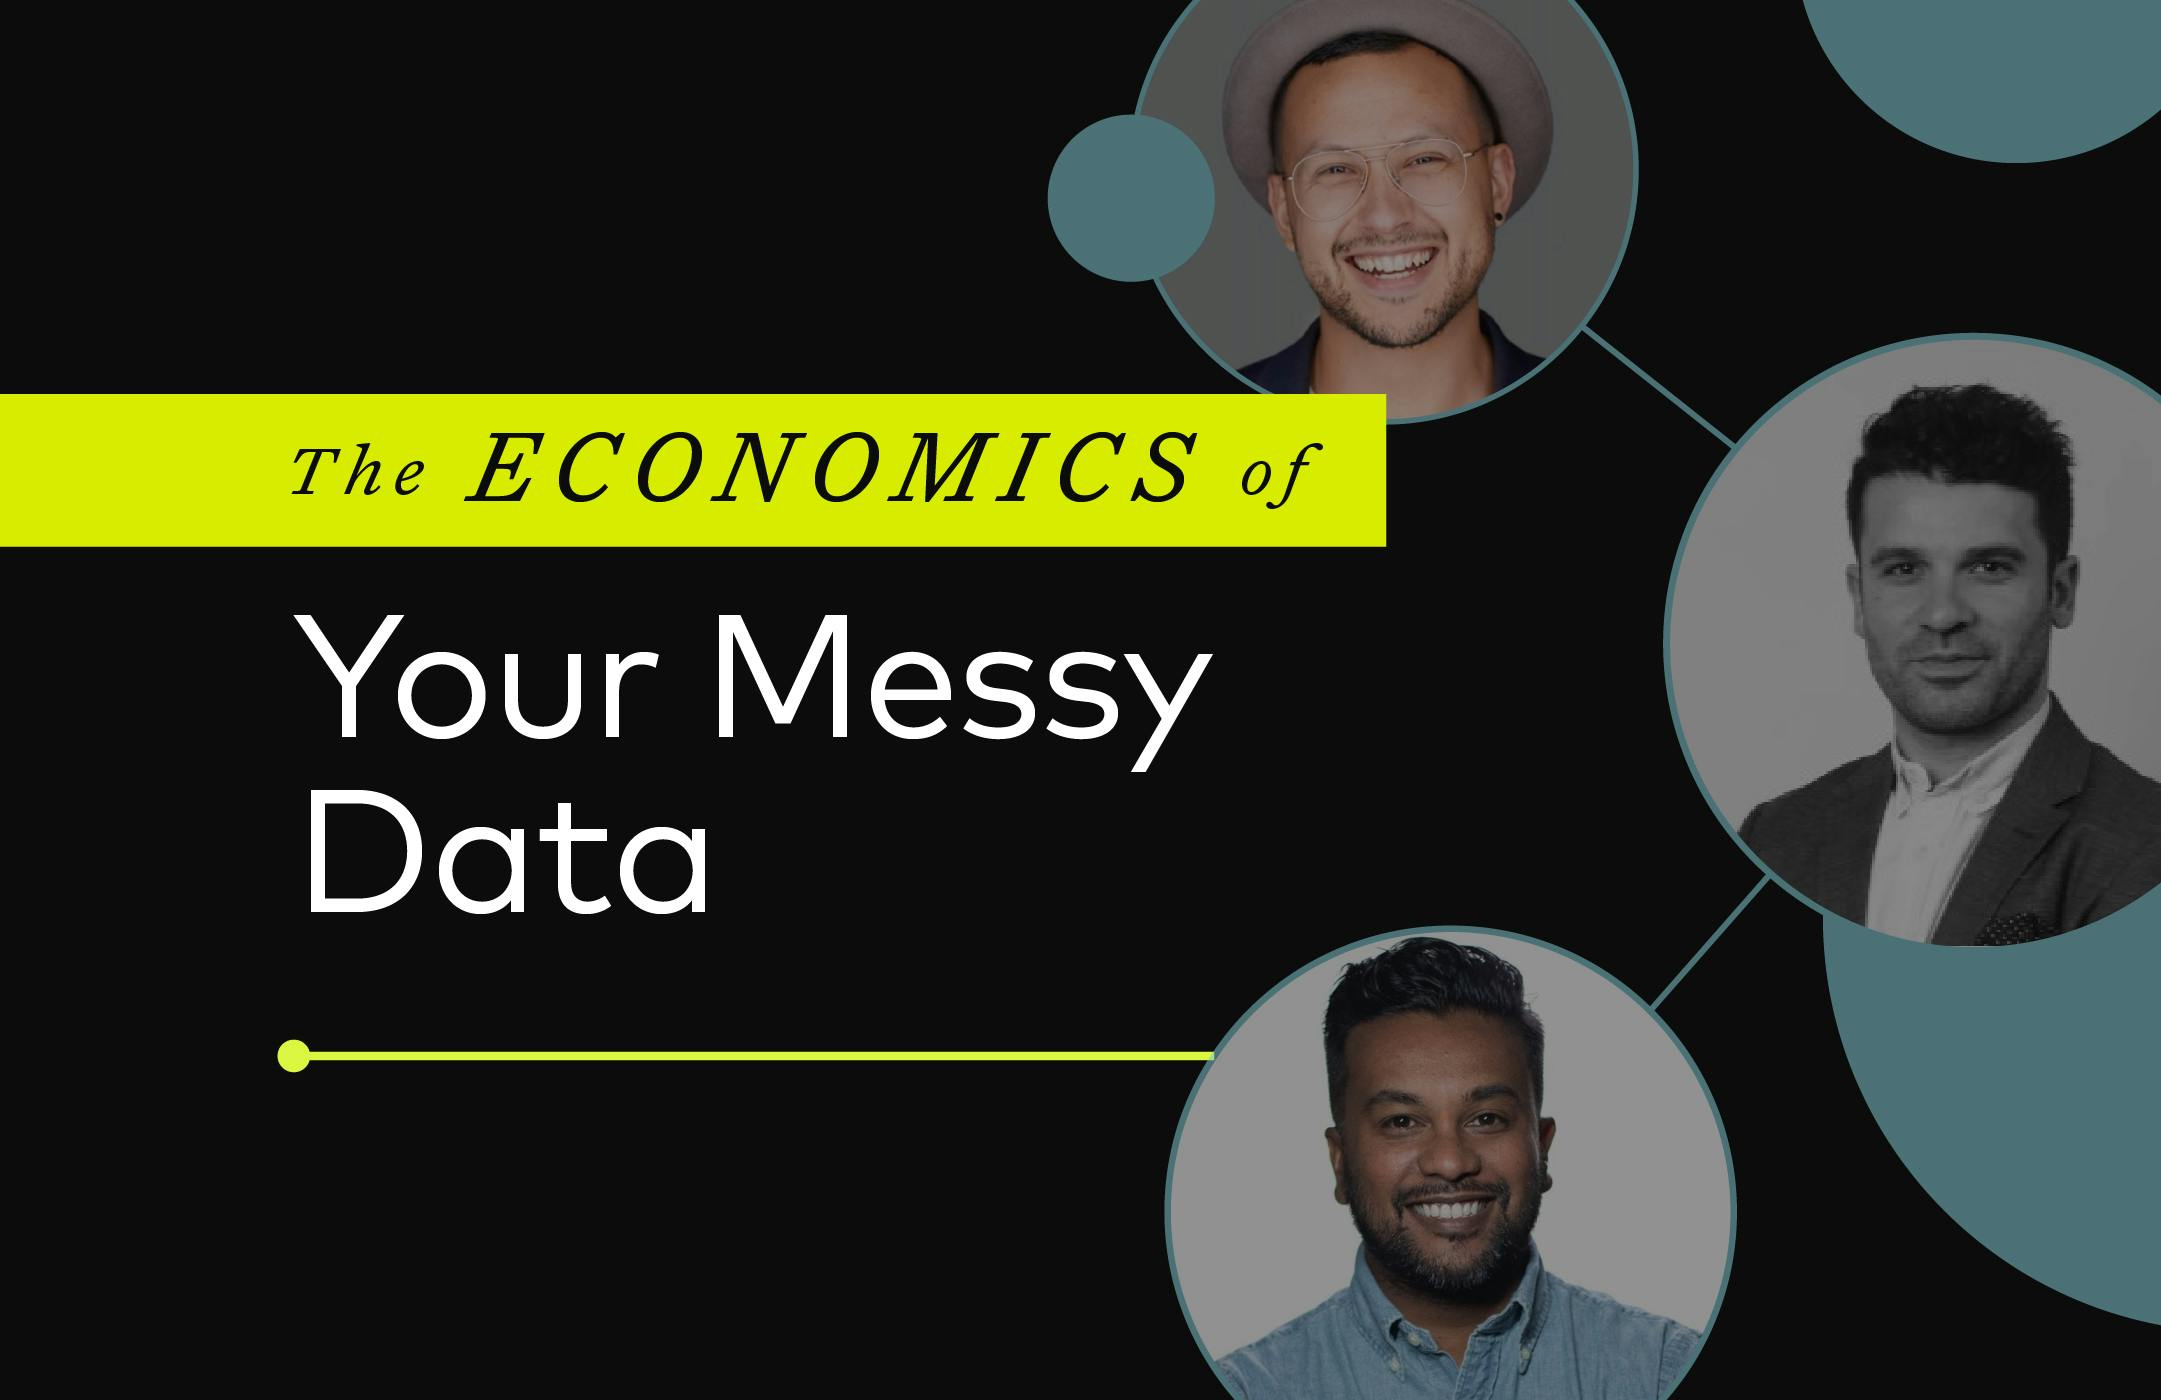 The Economics of Your Messy Data